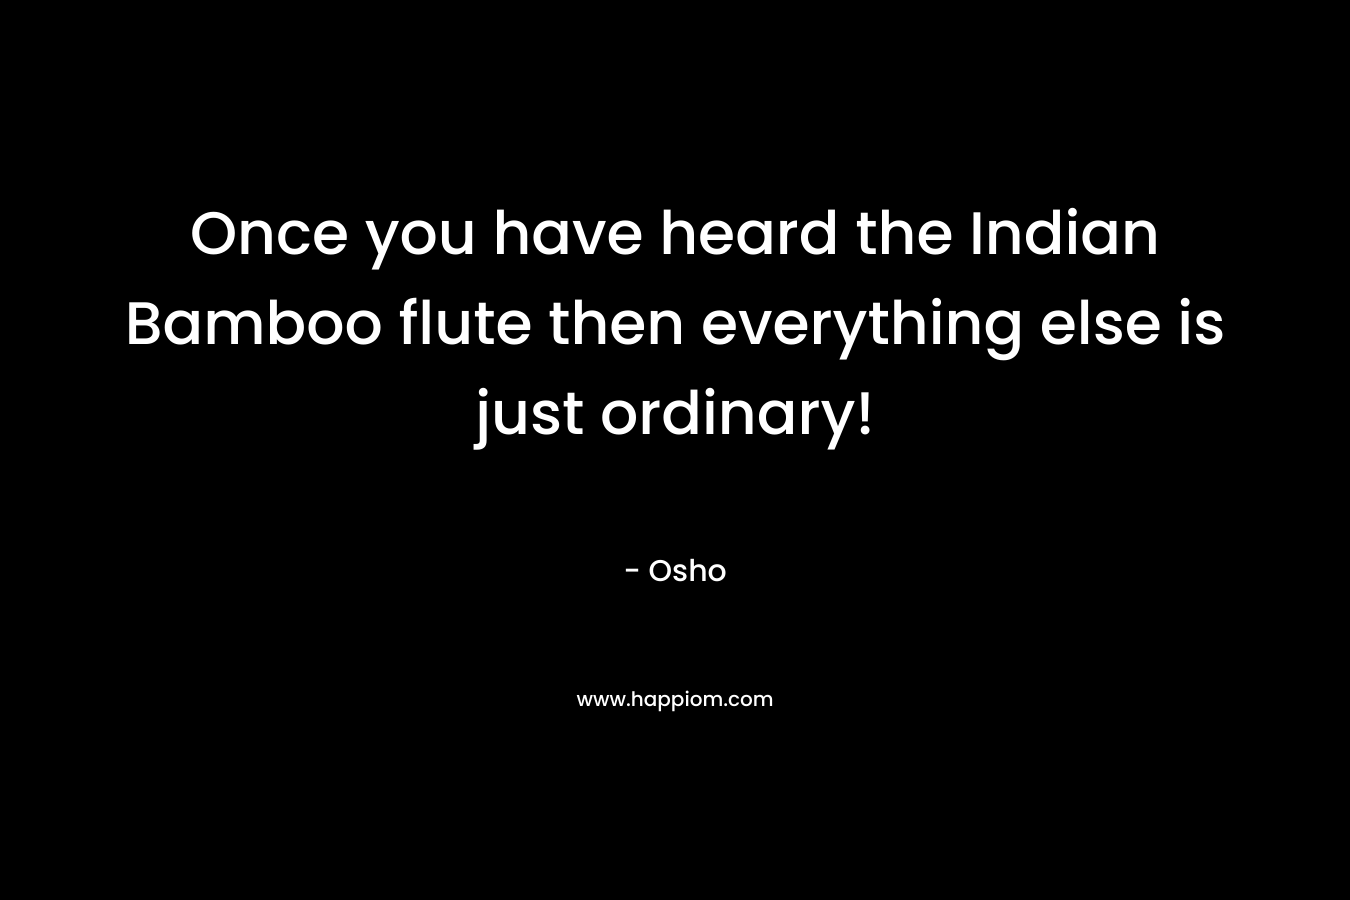 Once you have heard the Indian Bamboo flute then everything else is just ordinary!